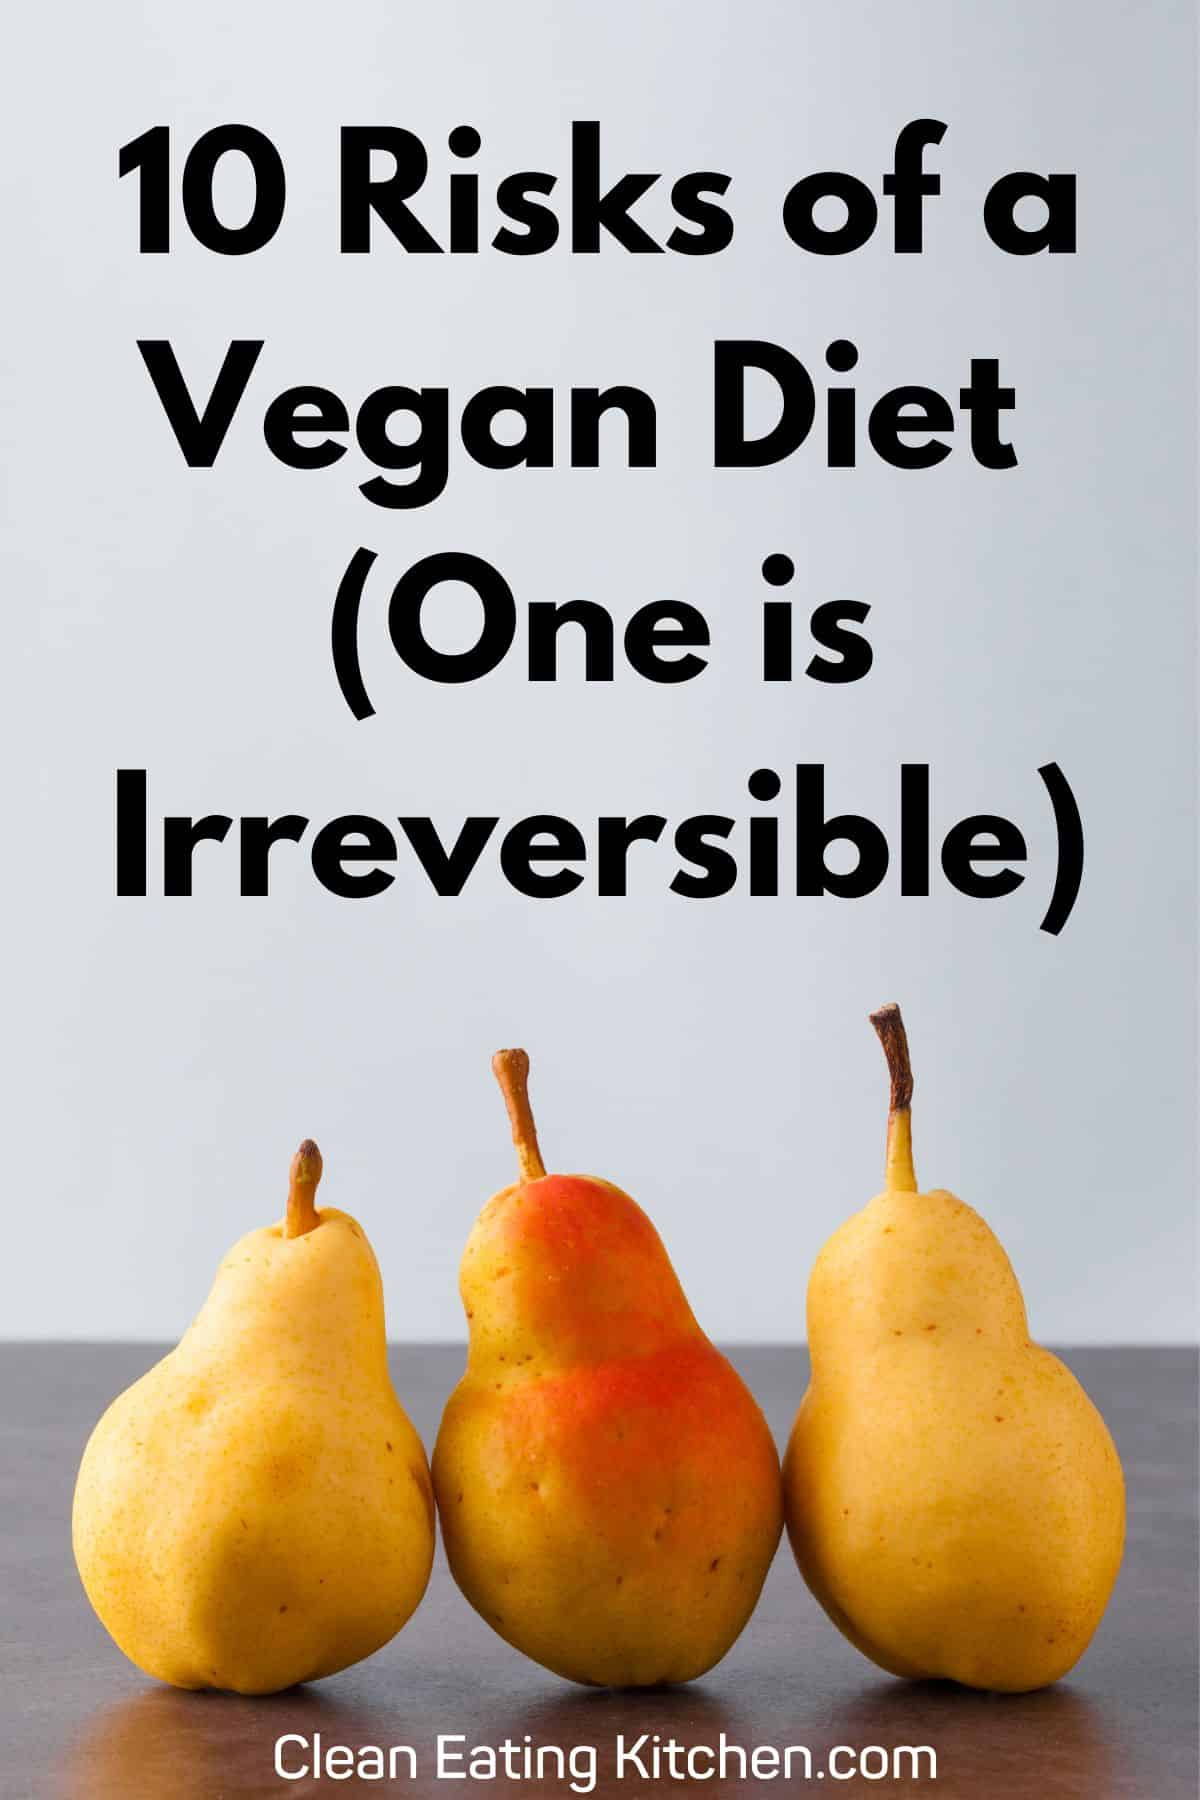 https://www.cleaneatingkitchen.com/wp-content/uploads/2023/04/risks-of-a-vegan-diet-graphic.jpg